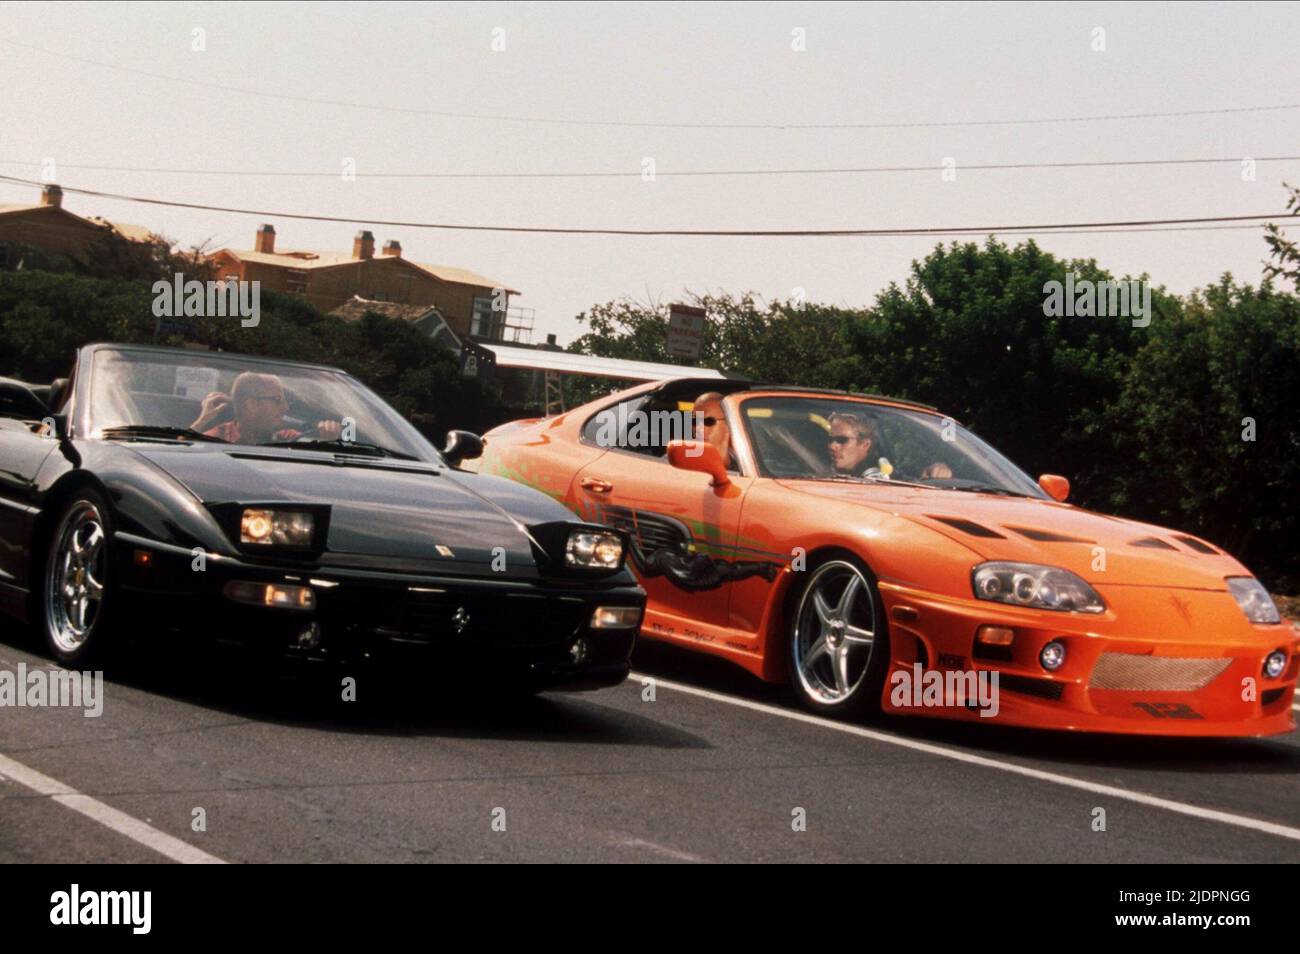 Motori diesel,WALKER, The Fast And The Furious, 2001 Foto Stock